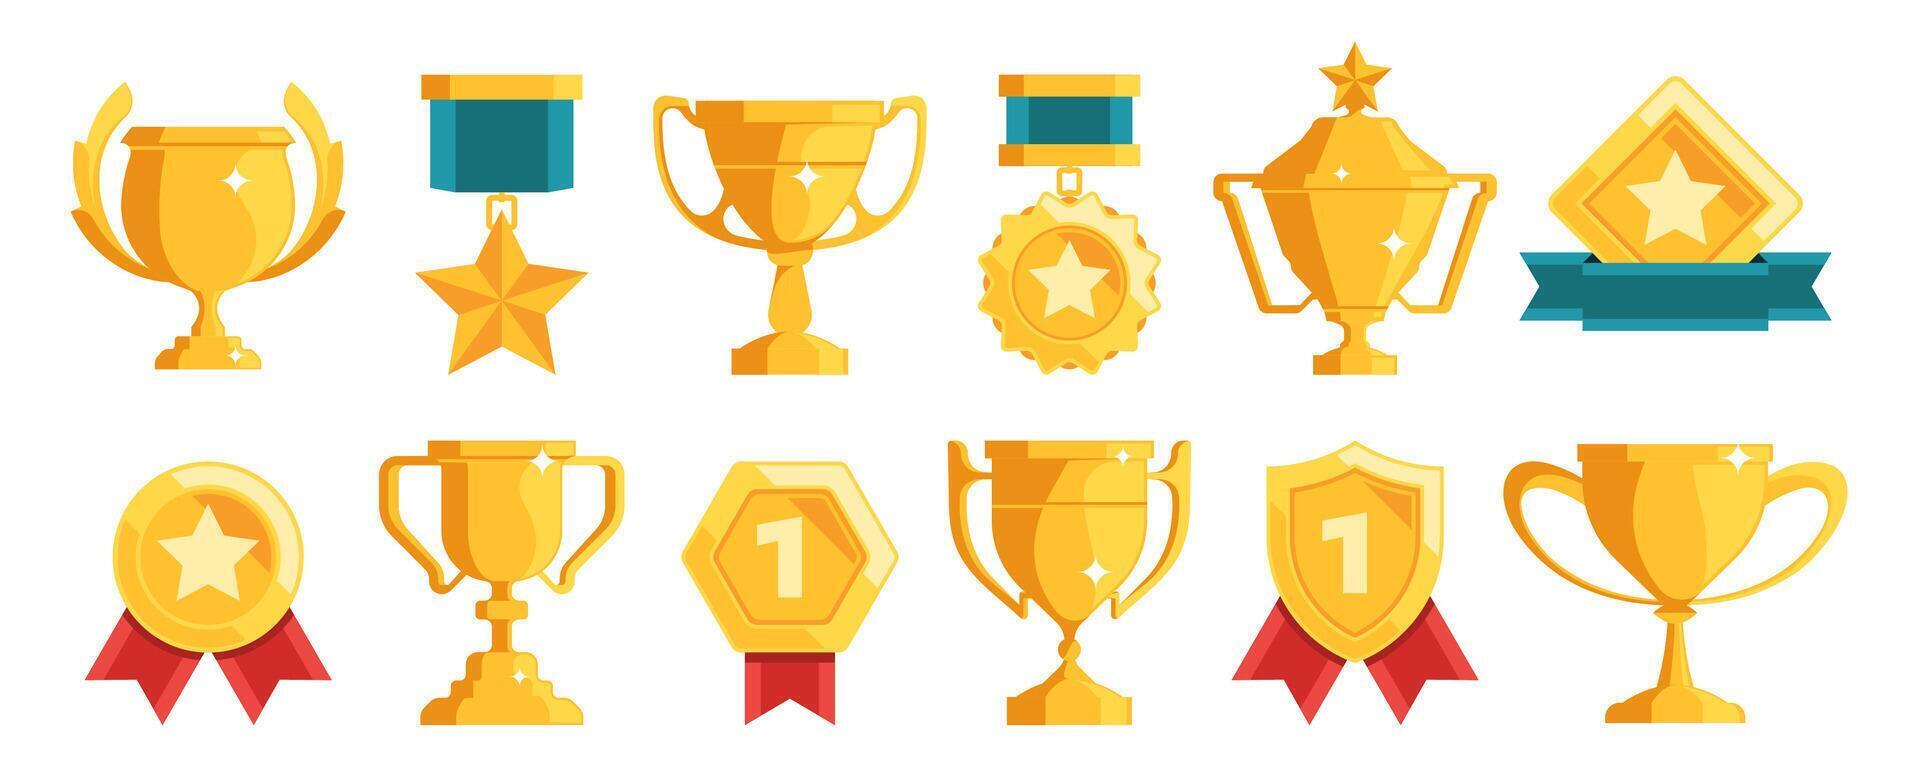 Golden trophy and awards icons. Competition achievement medal flat design, trophy cup and medal ribbons for award ceremony concept. Vector set